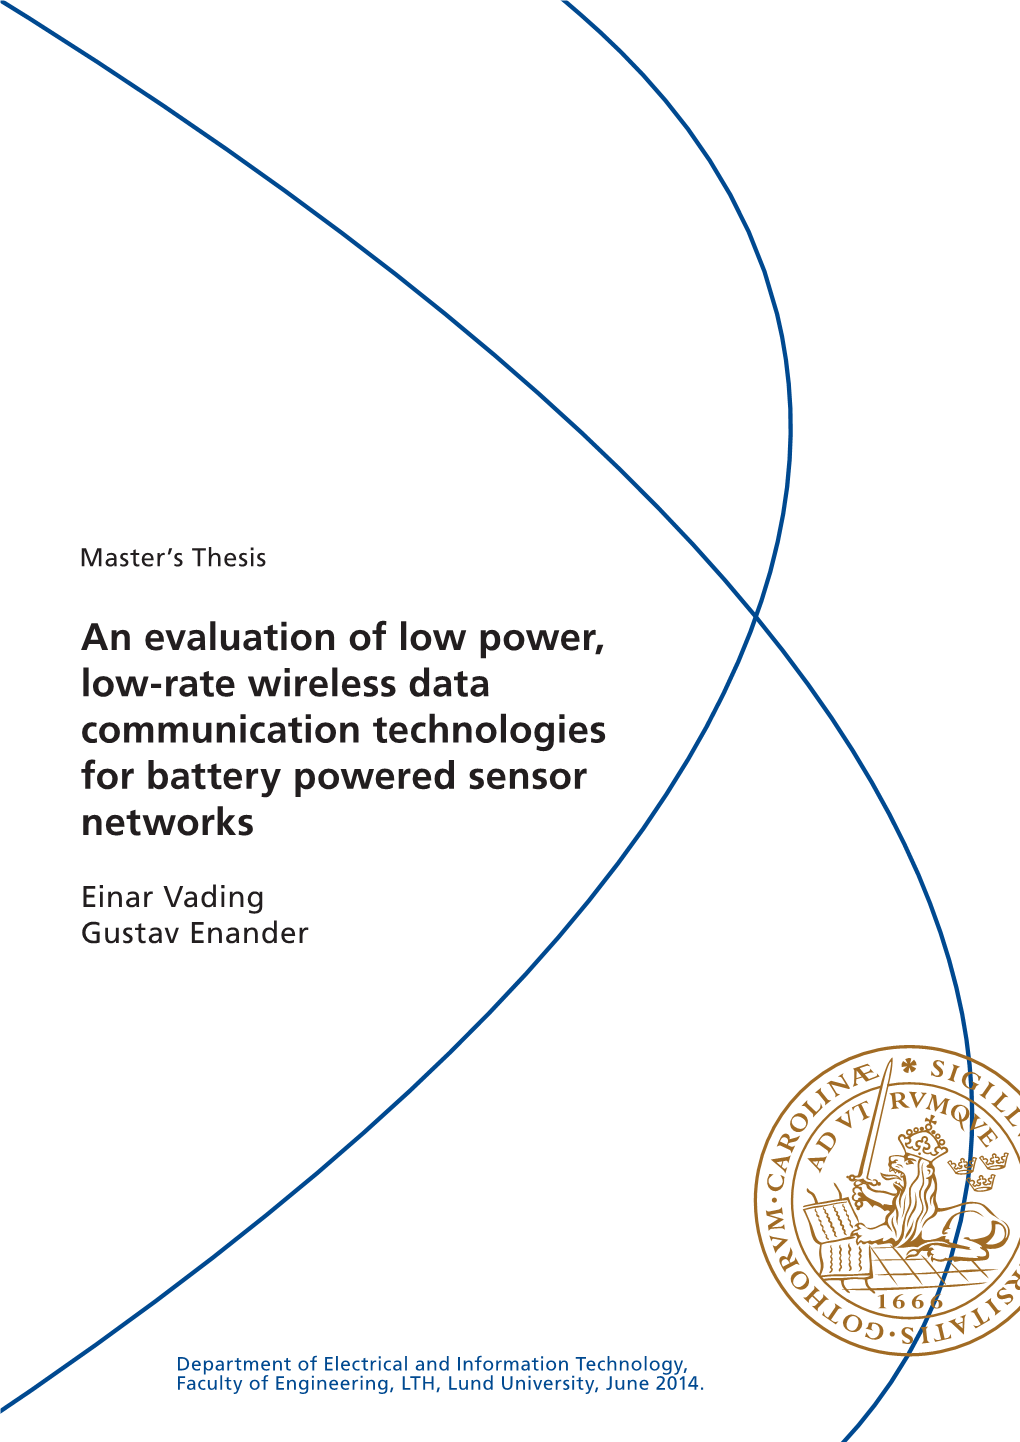 An Evaluation of Low Power, Low-Rate Wireless Data Communication